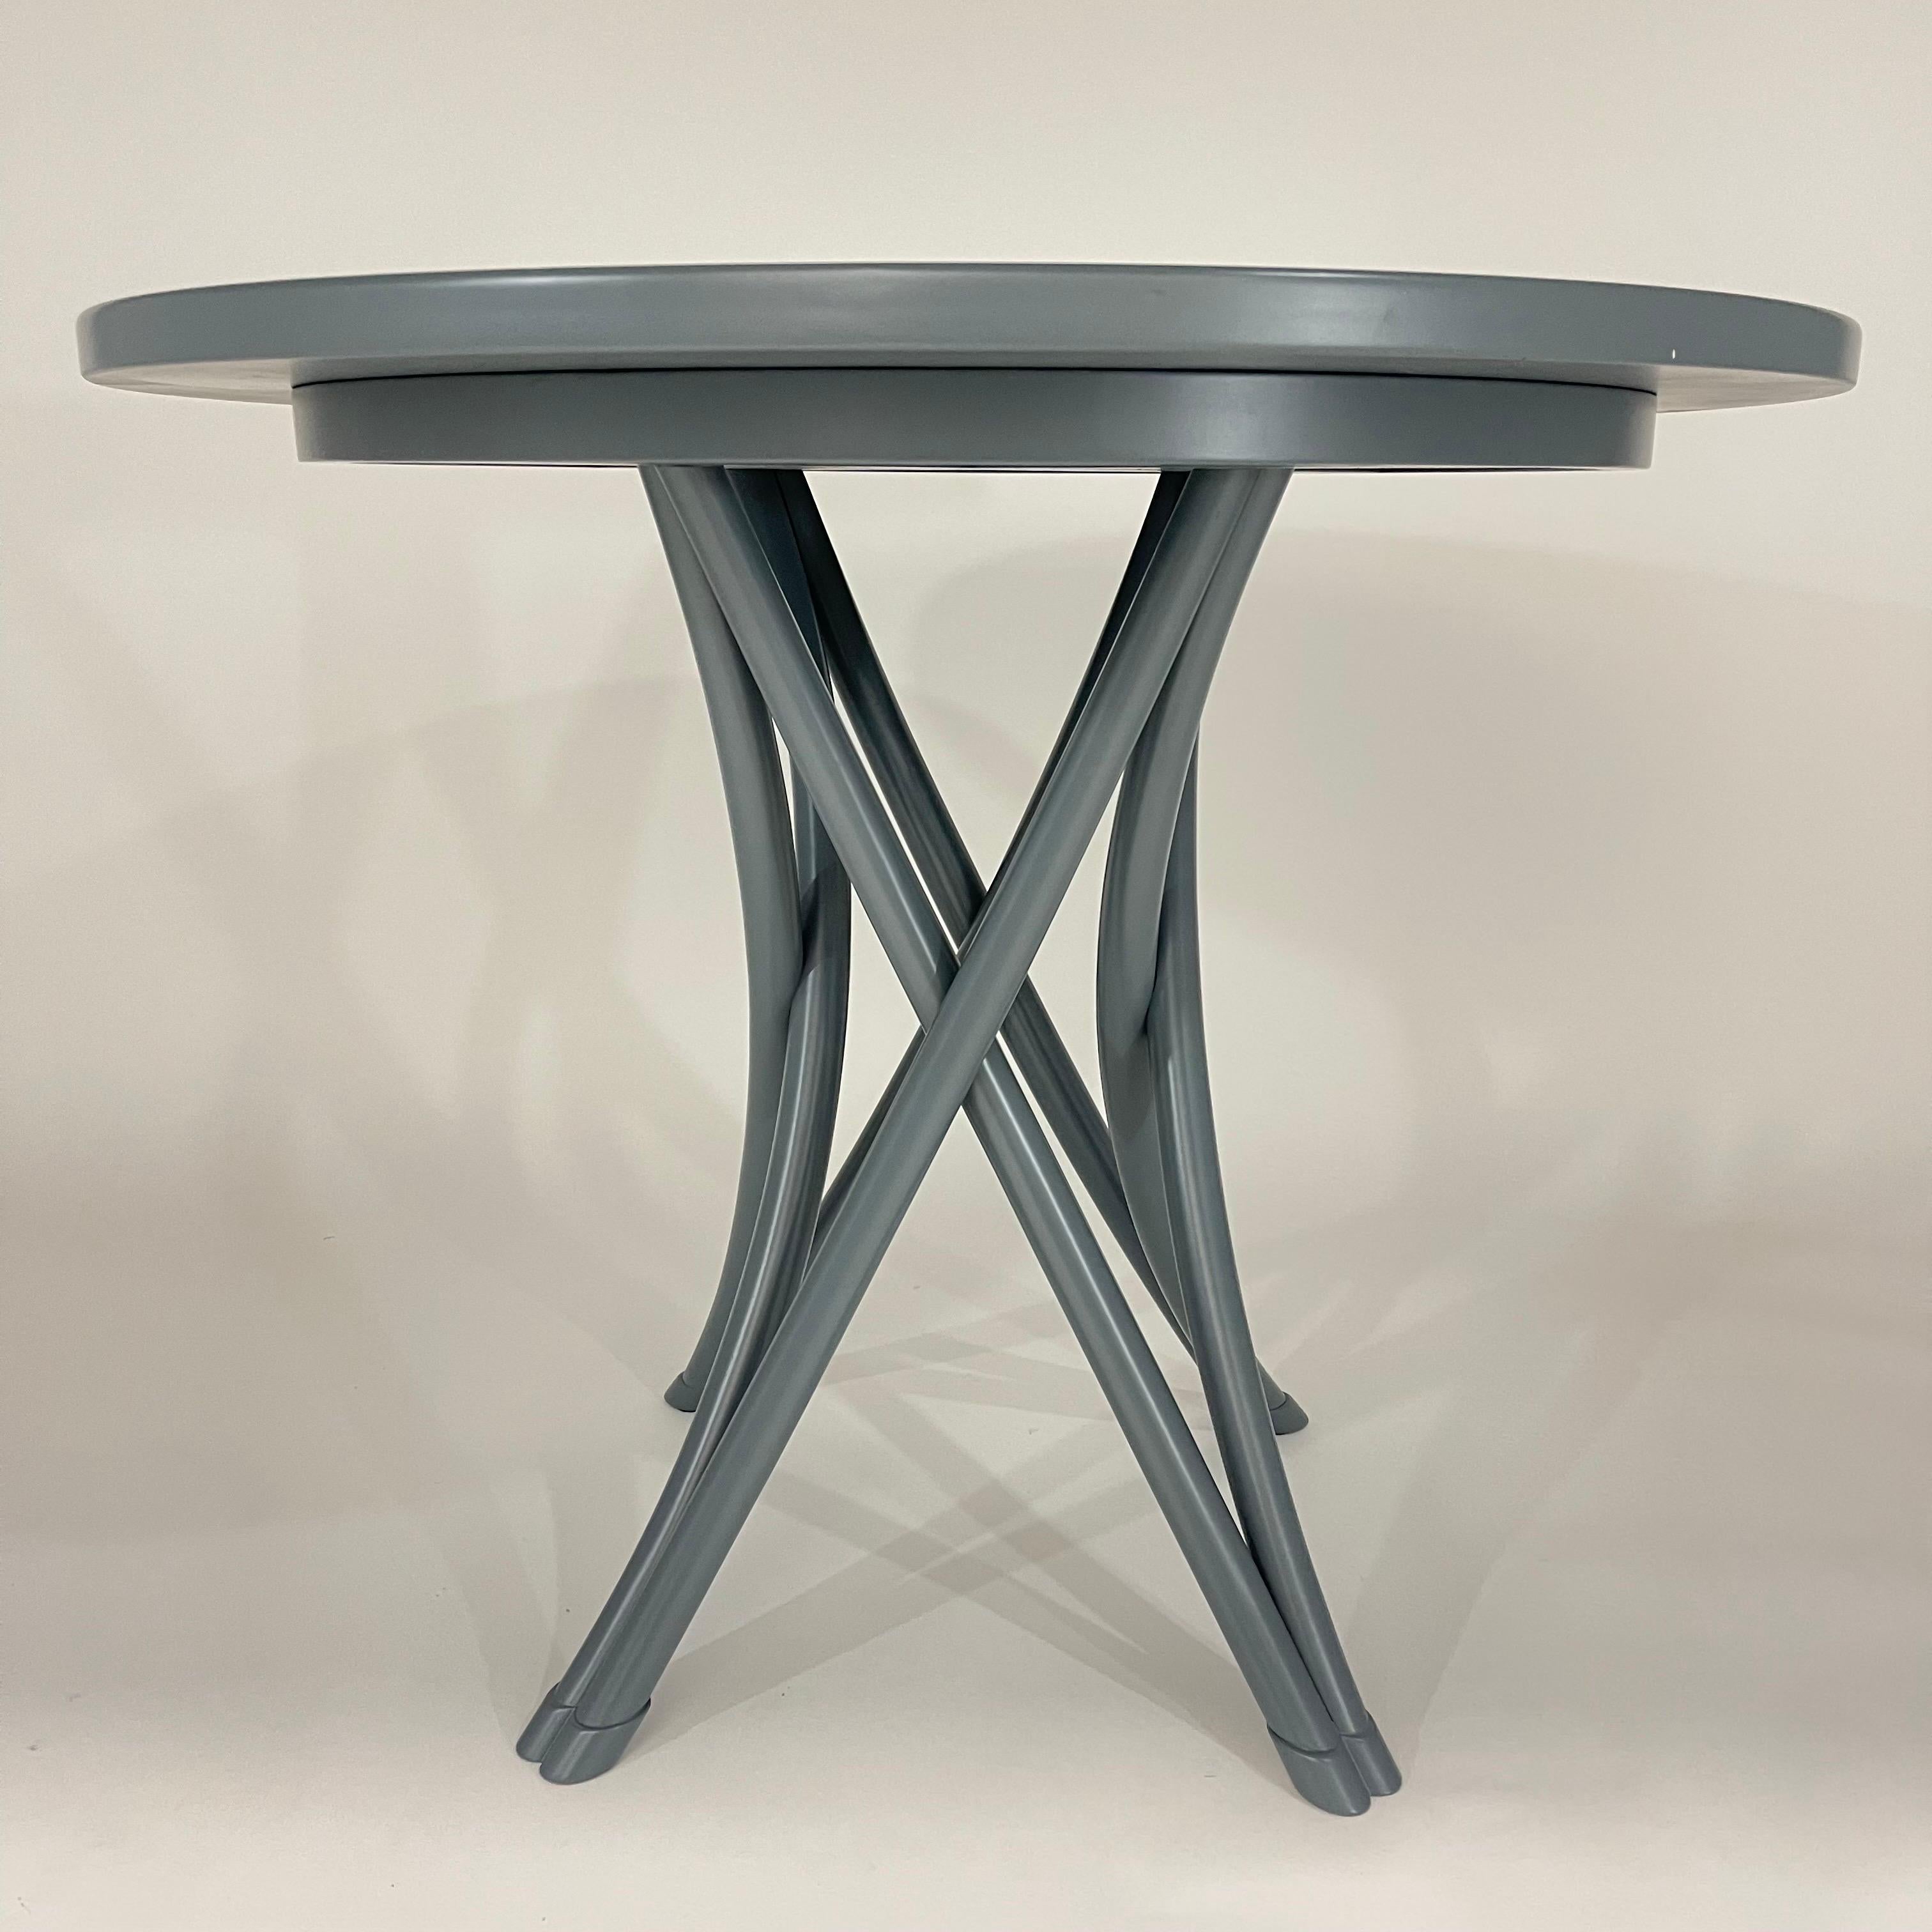 Iconic Rehbeintisch bistro dining table by Gebrüder Thonetm rendered in Beech wood with a bentwood frame. Versatile size is perfect for 2 or 4 chairs, dining, games, center, entry, side or end table.  Color is D12 RAL 7031 Blue Grey.